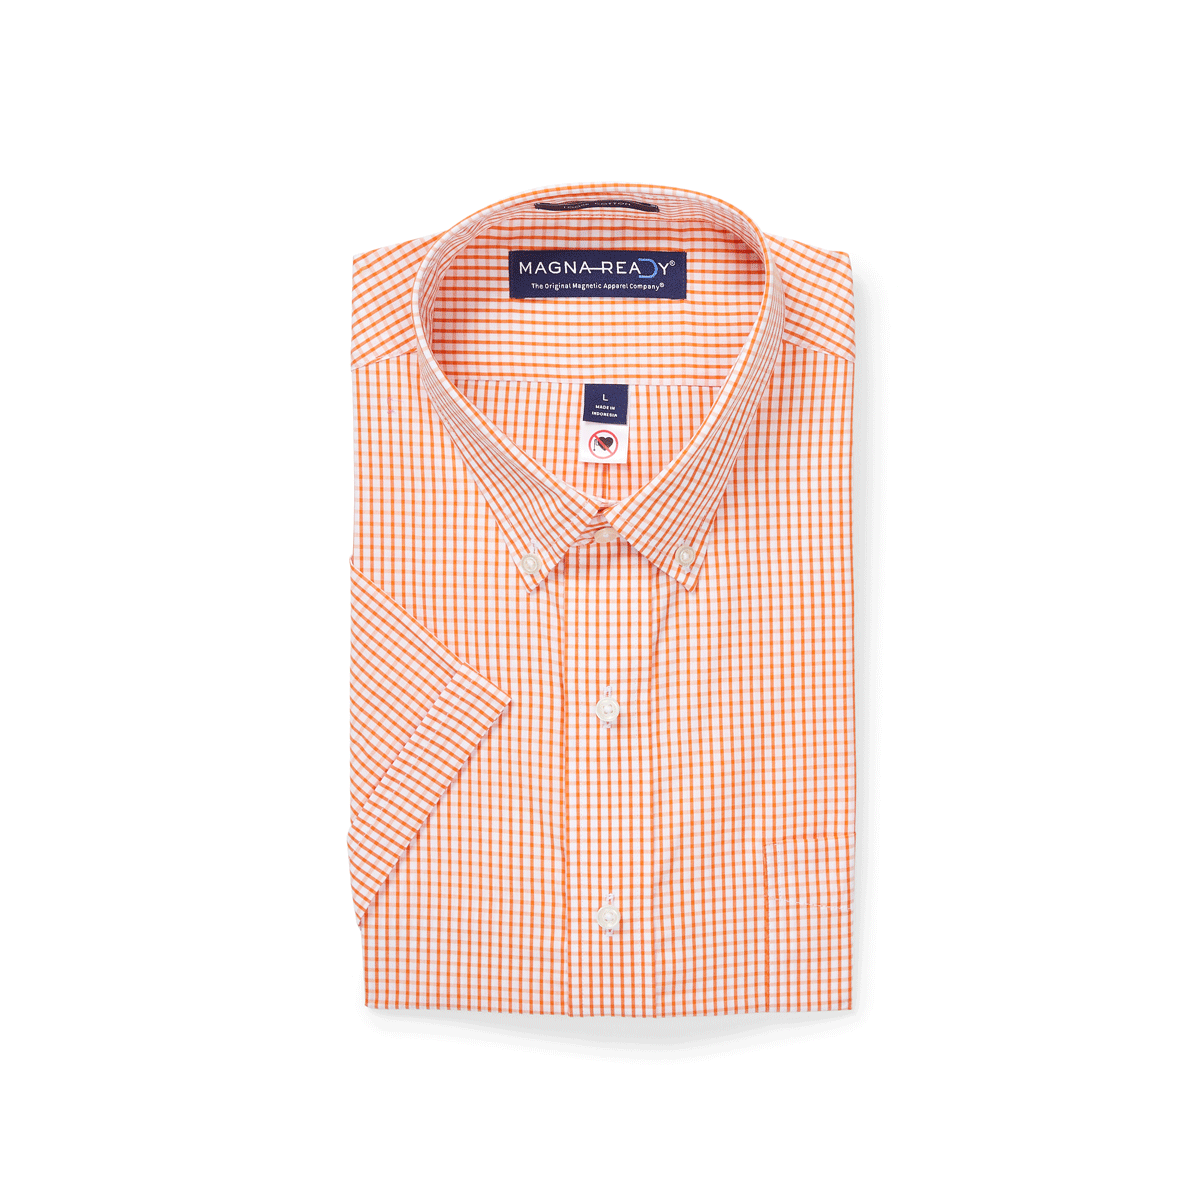 Short Sleeve Orange and White Gingham Cotton ‘Heights’ Shirt with Magnetic Closures